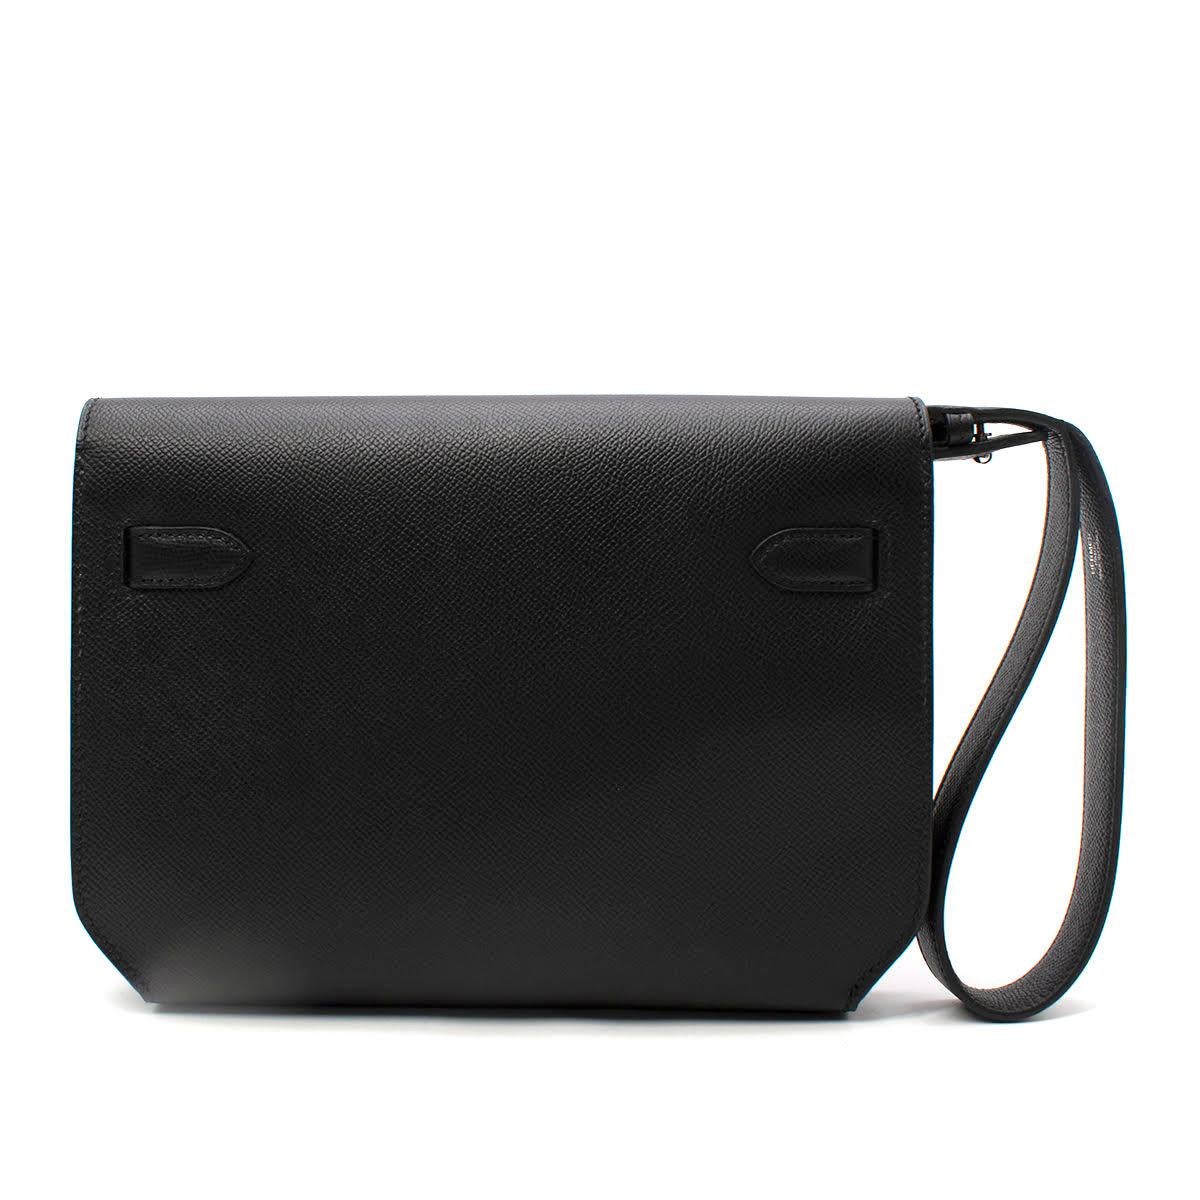 - Classic Kelly turnlock closure
- Palladium hardware
- Crafted from Epsom calfskin leather
- Leather wristlet strap 
- Tonal black leather interior with a front pocket and silver foil embossed logo
- Curved bottom edges

Materials:
Epsom